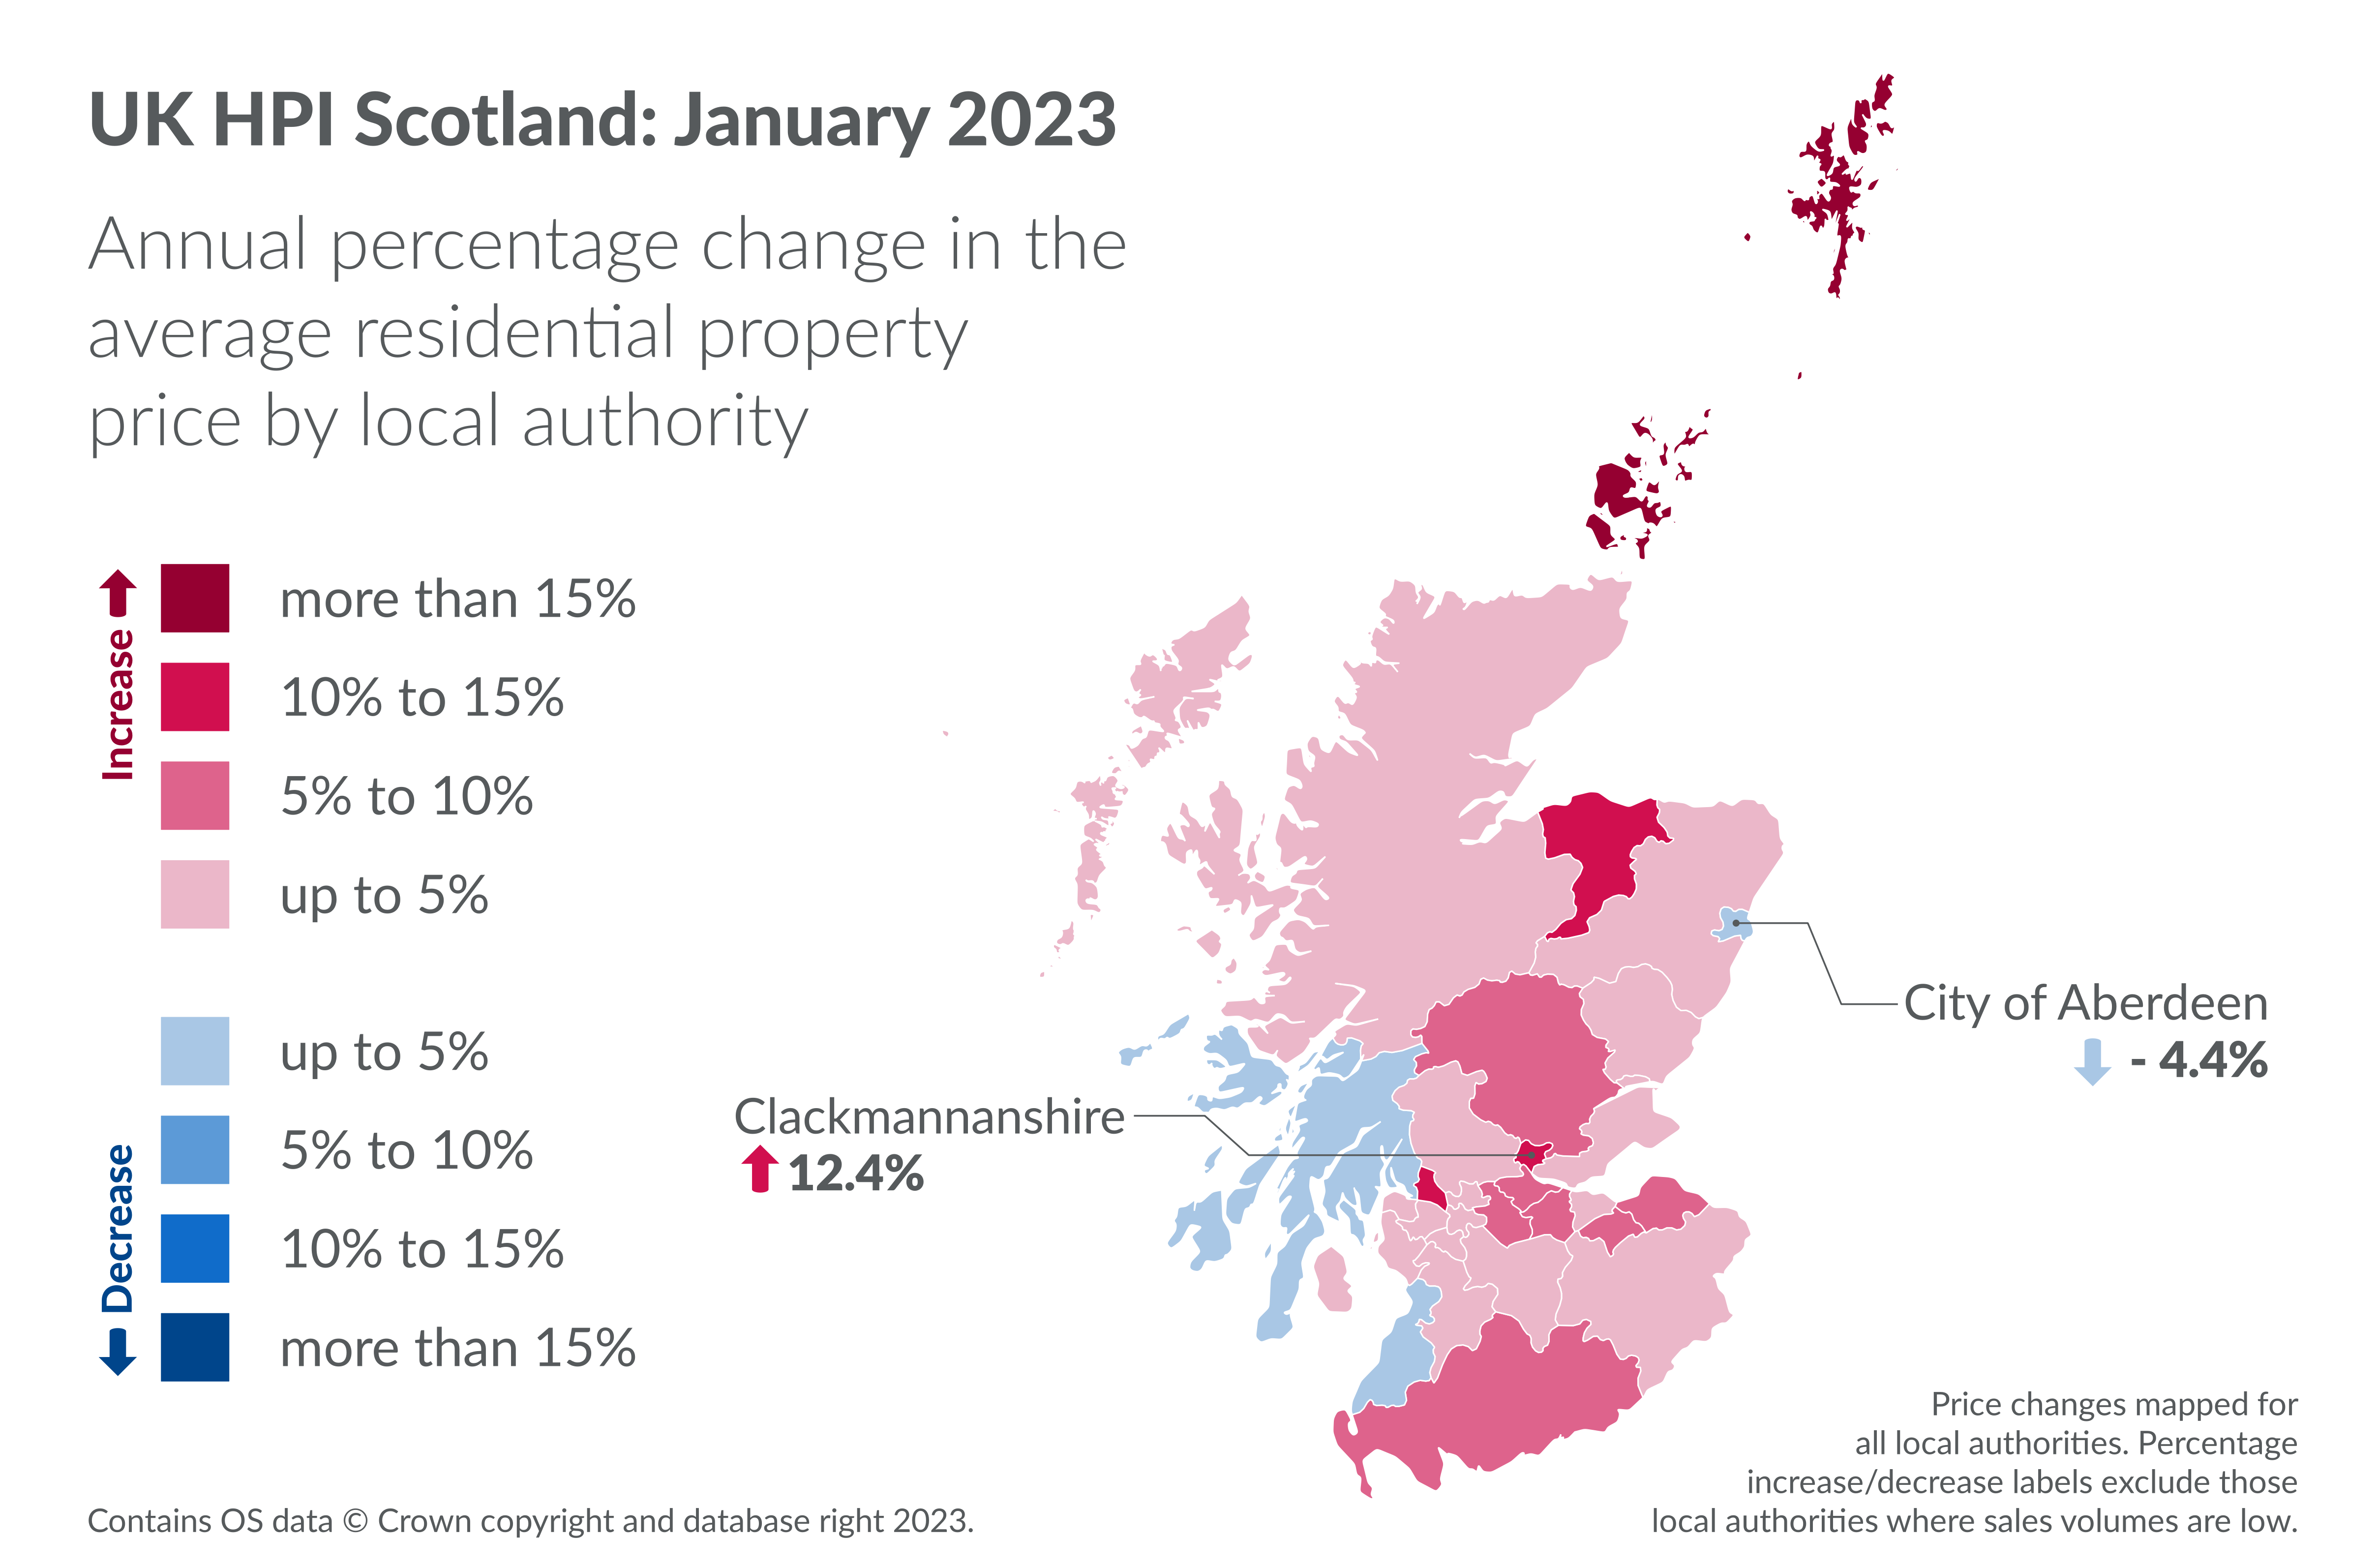 Average house price increases 1% since January 2022